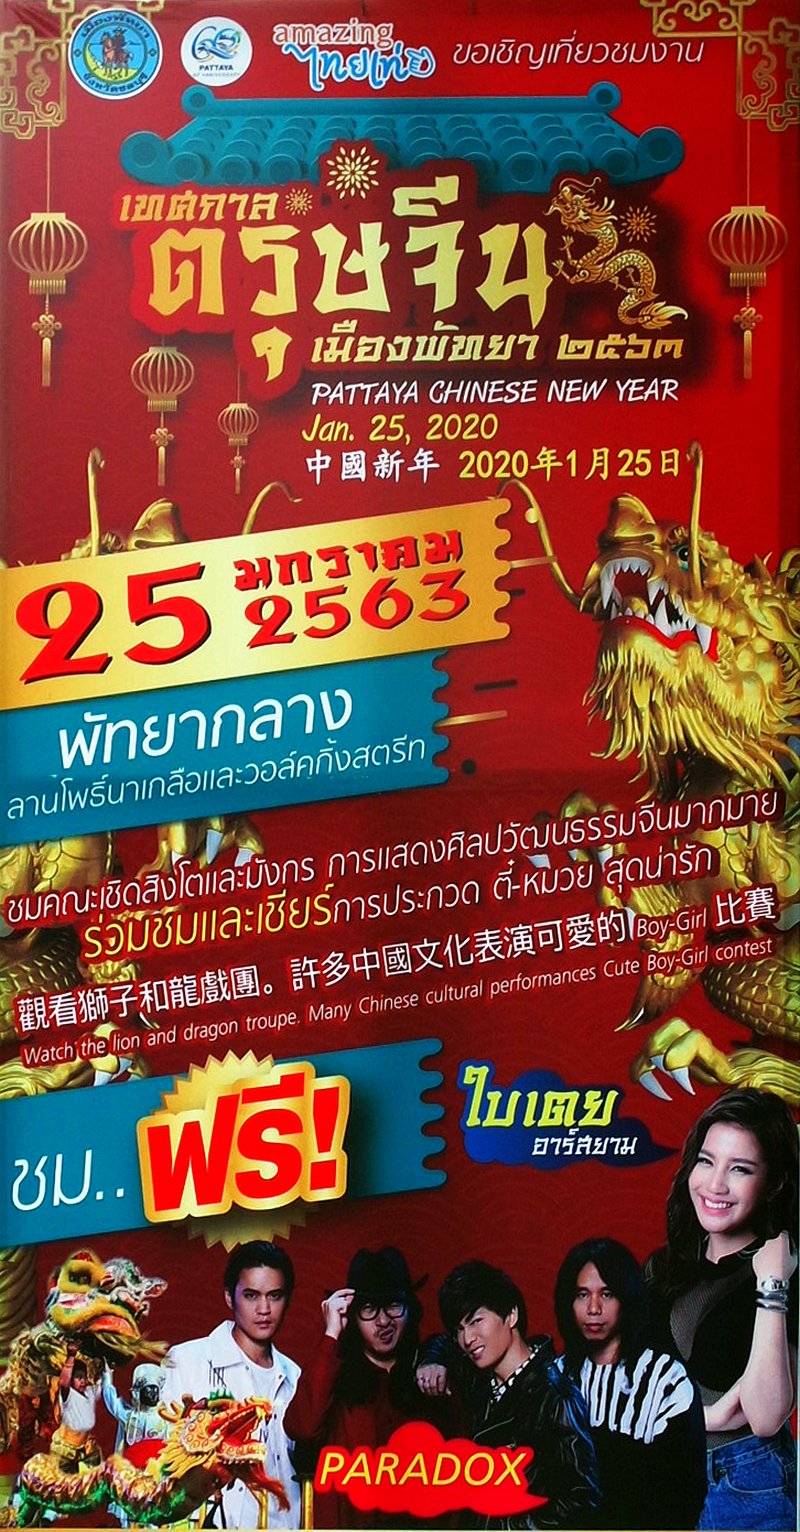 January 25th: Chinese New Year entertainment